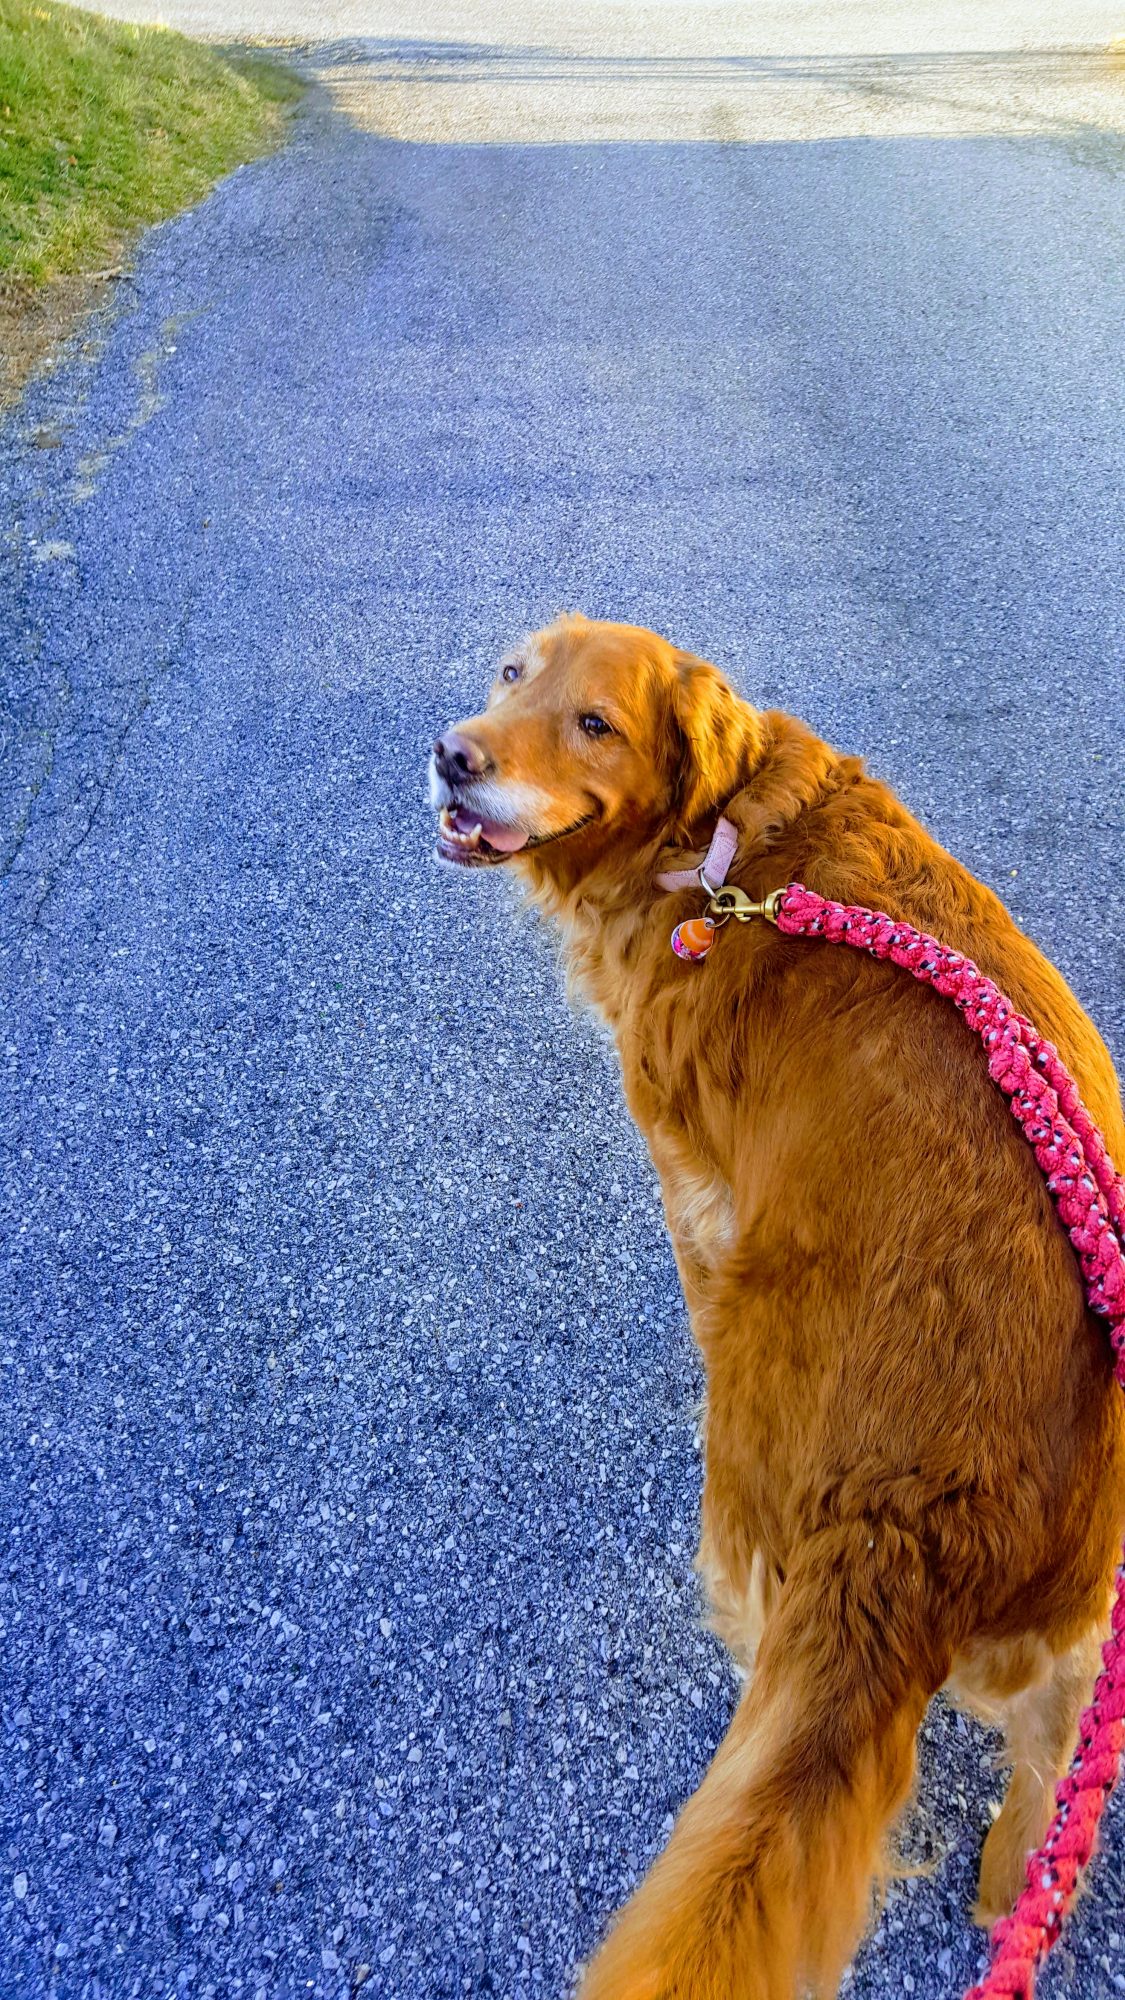 Emmie out for a walk